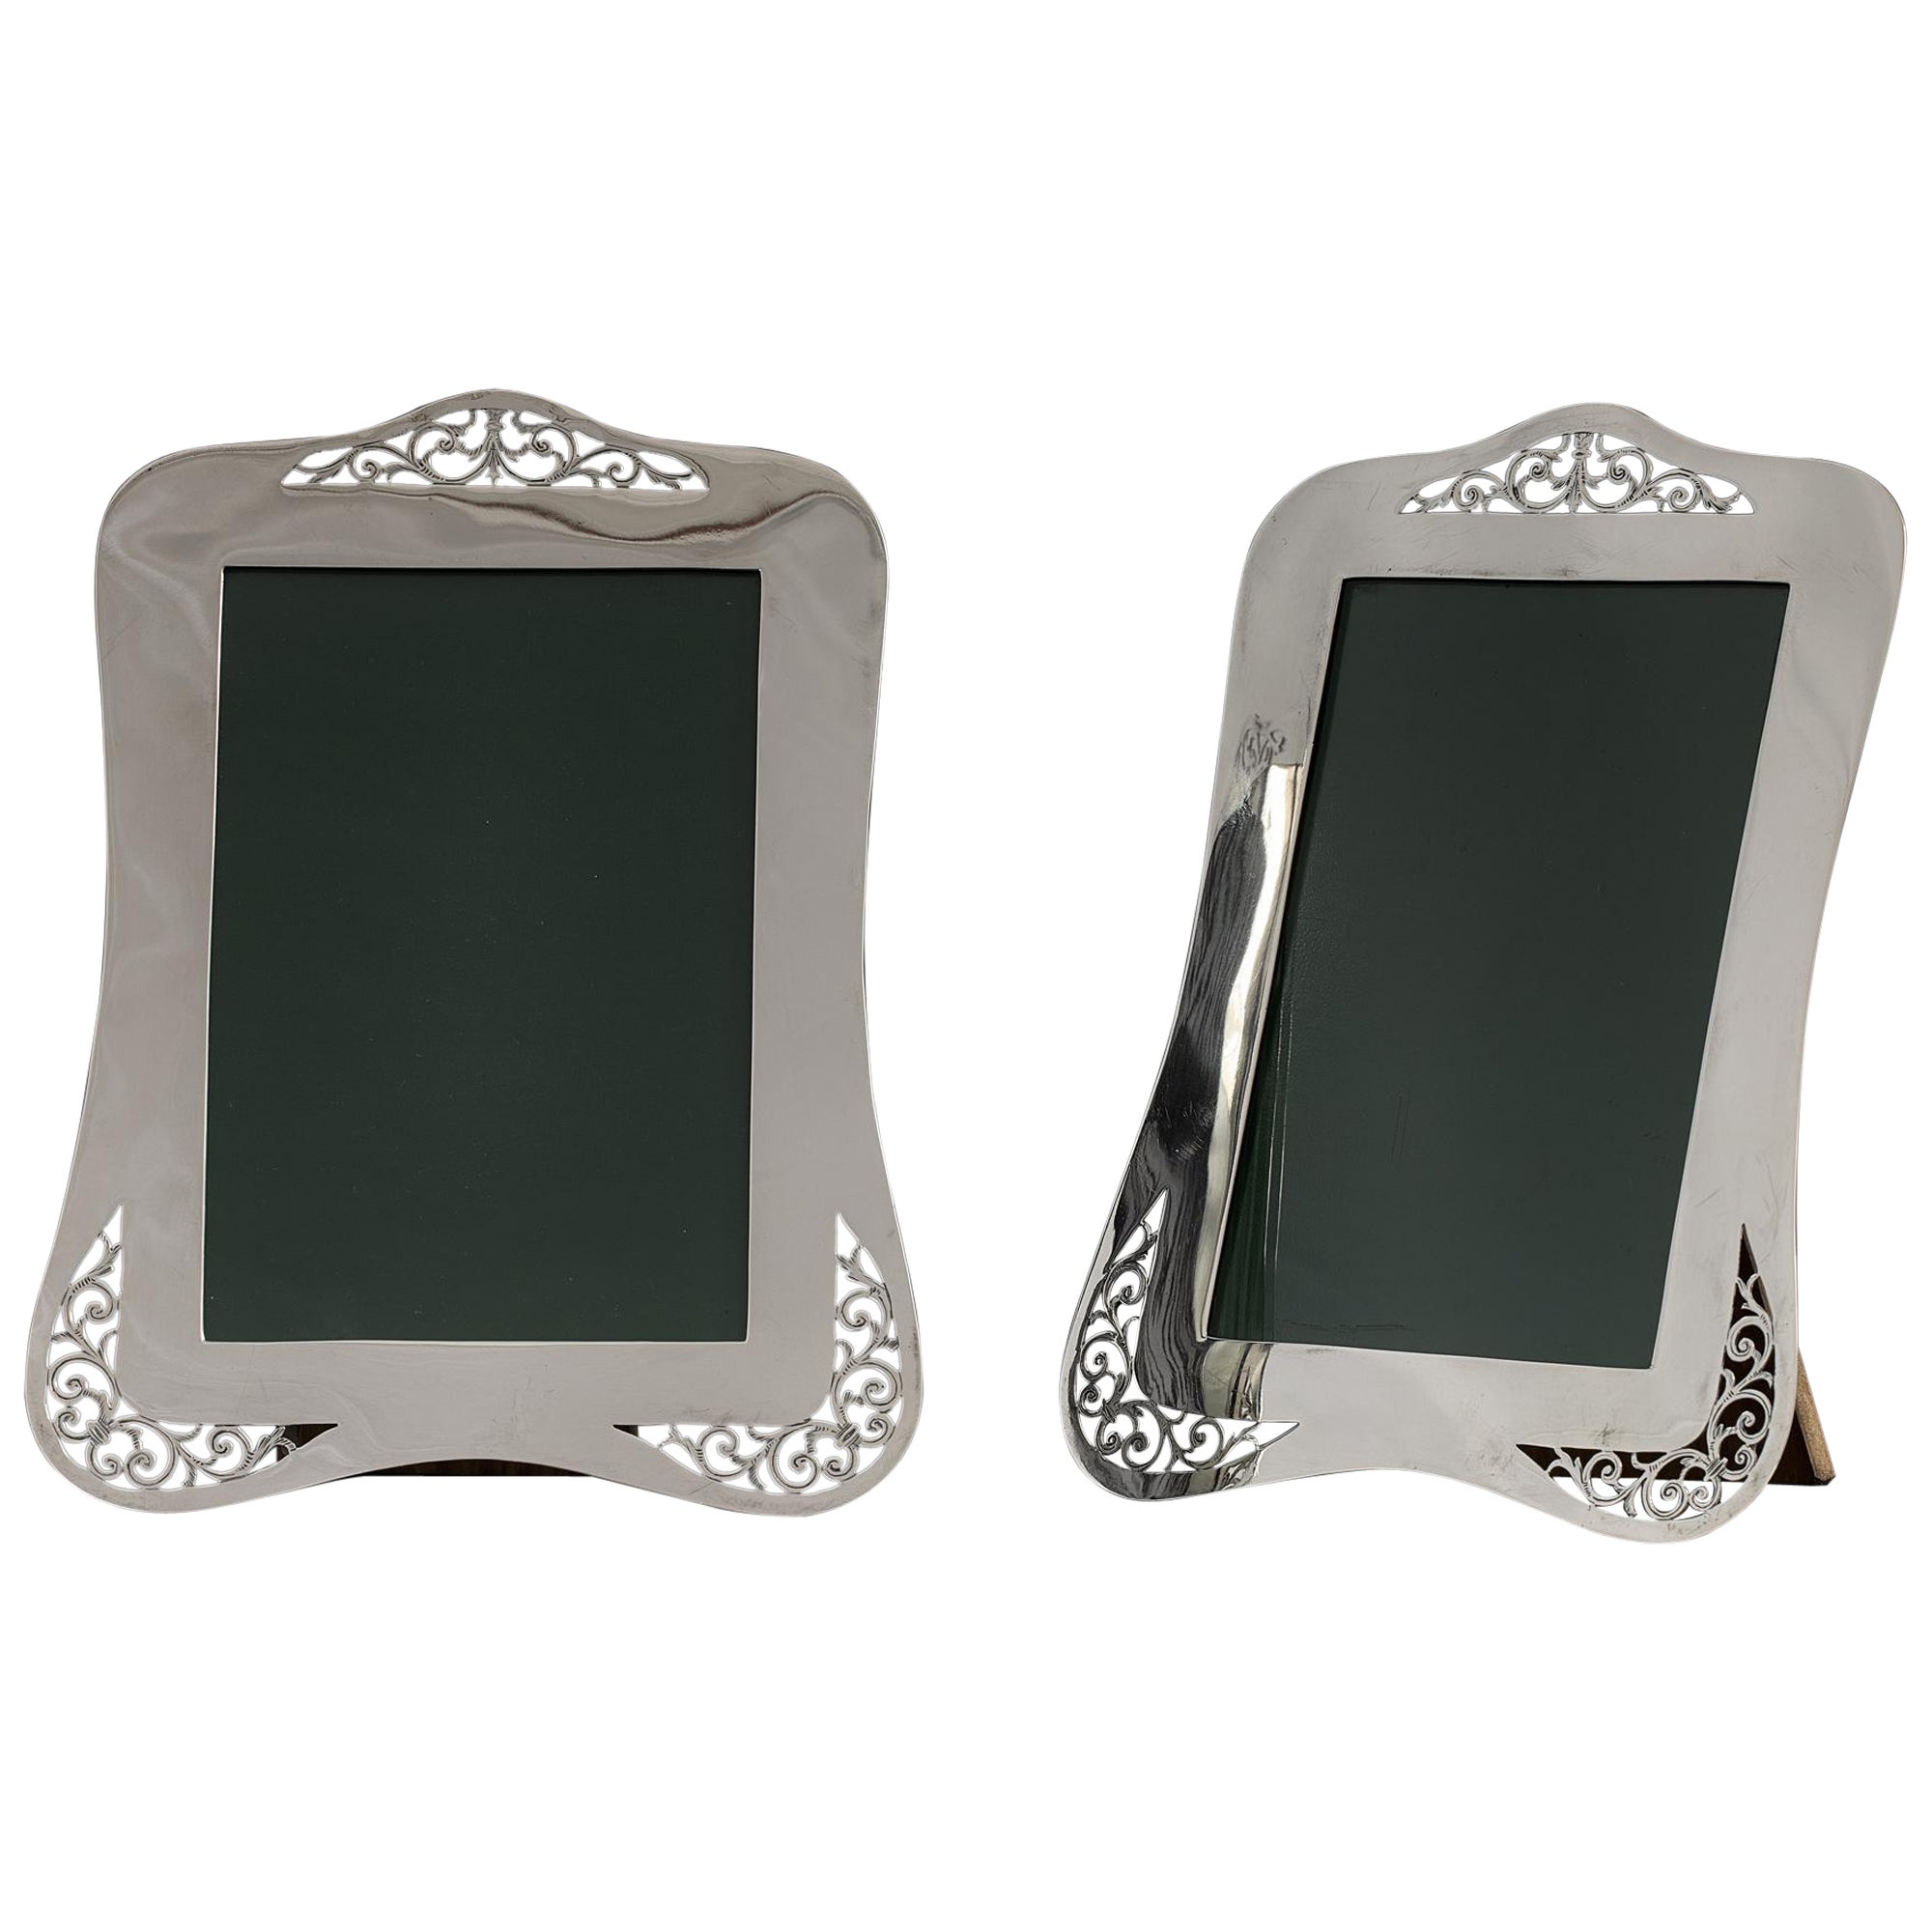 Pair of antique silver photograph frames